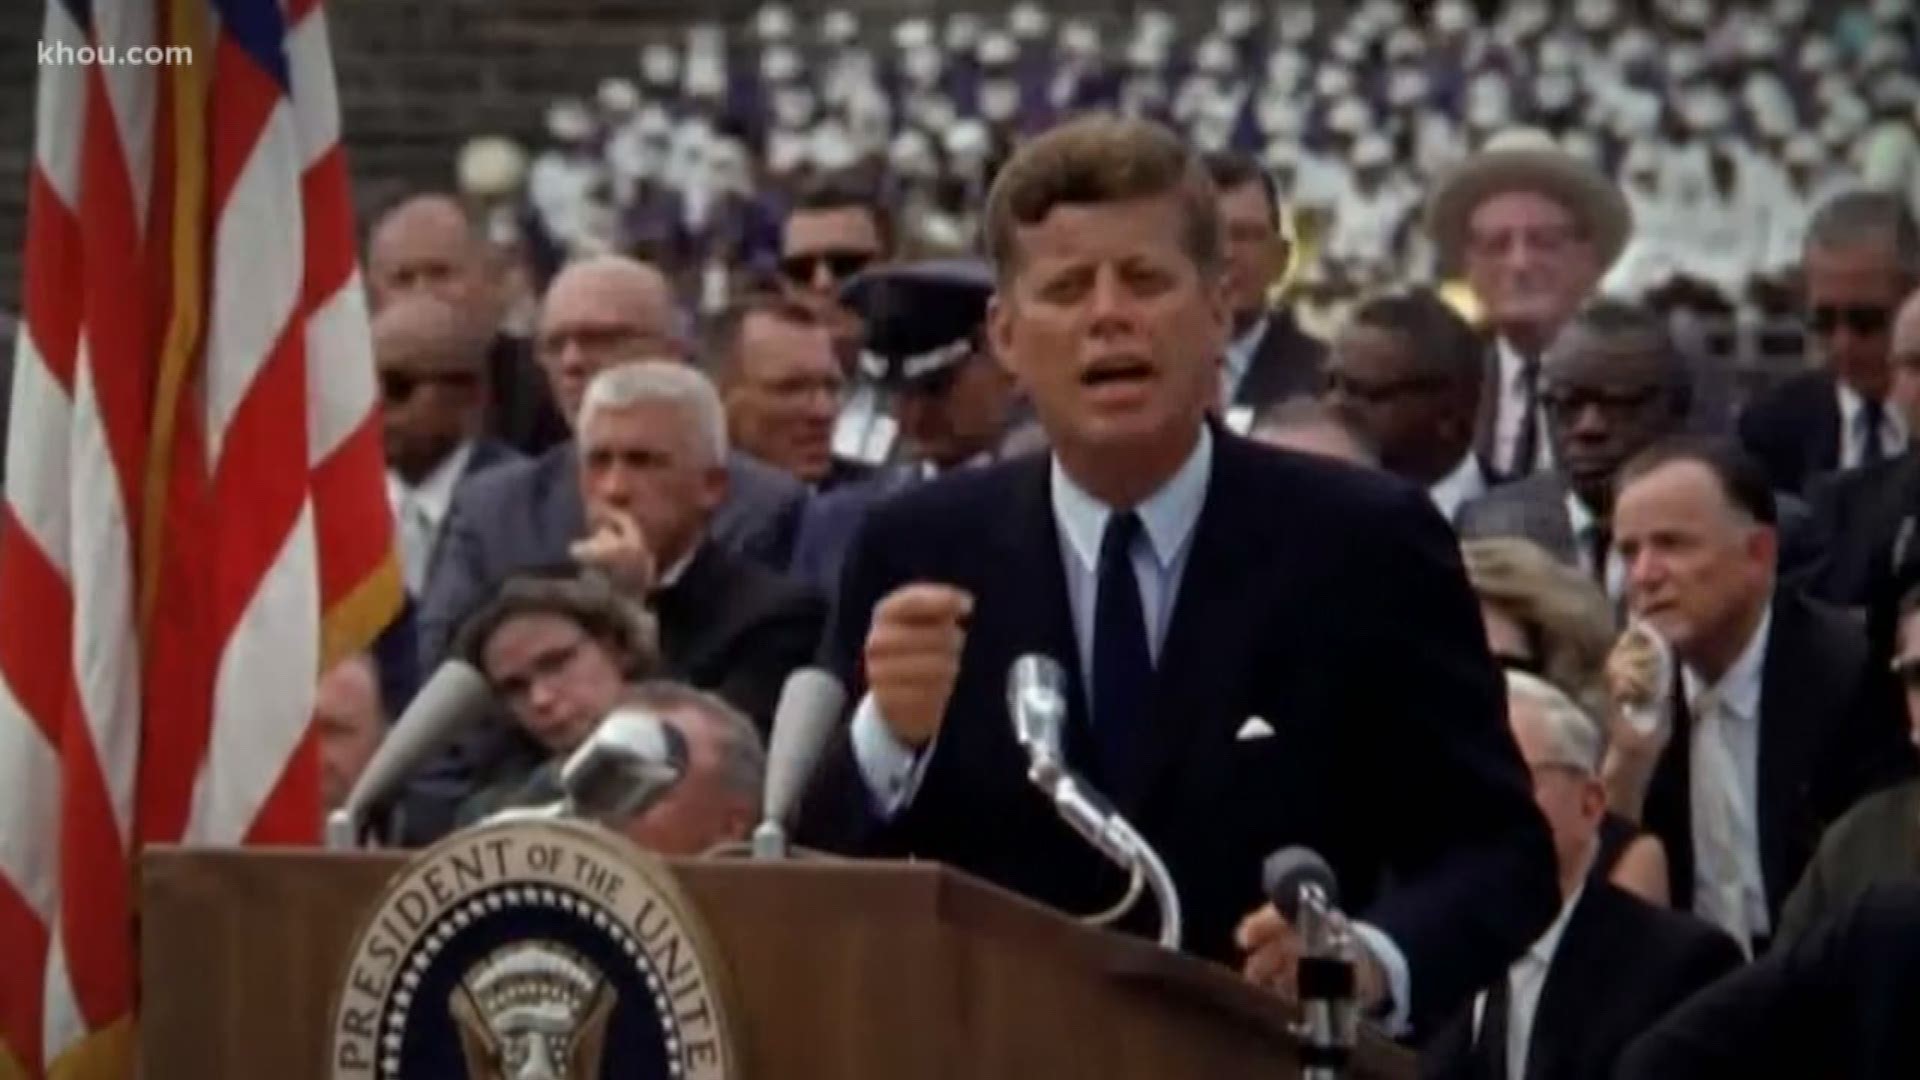 President John F. Kennedy's words inspiring us to one day land on the moon struck a chord with the city where it was made: right here in Houston.